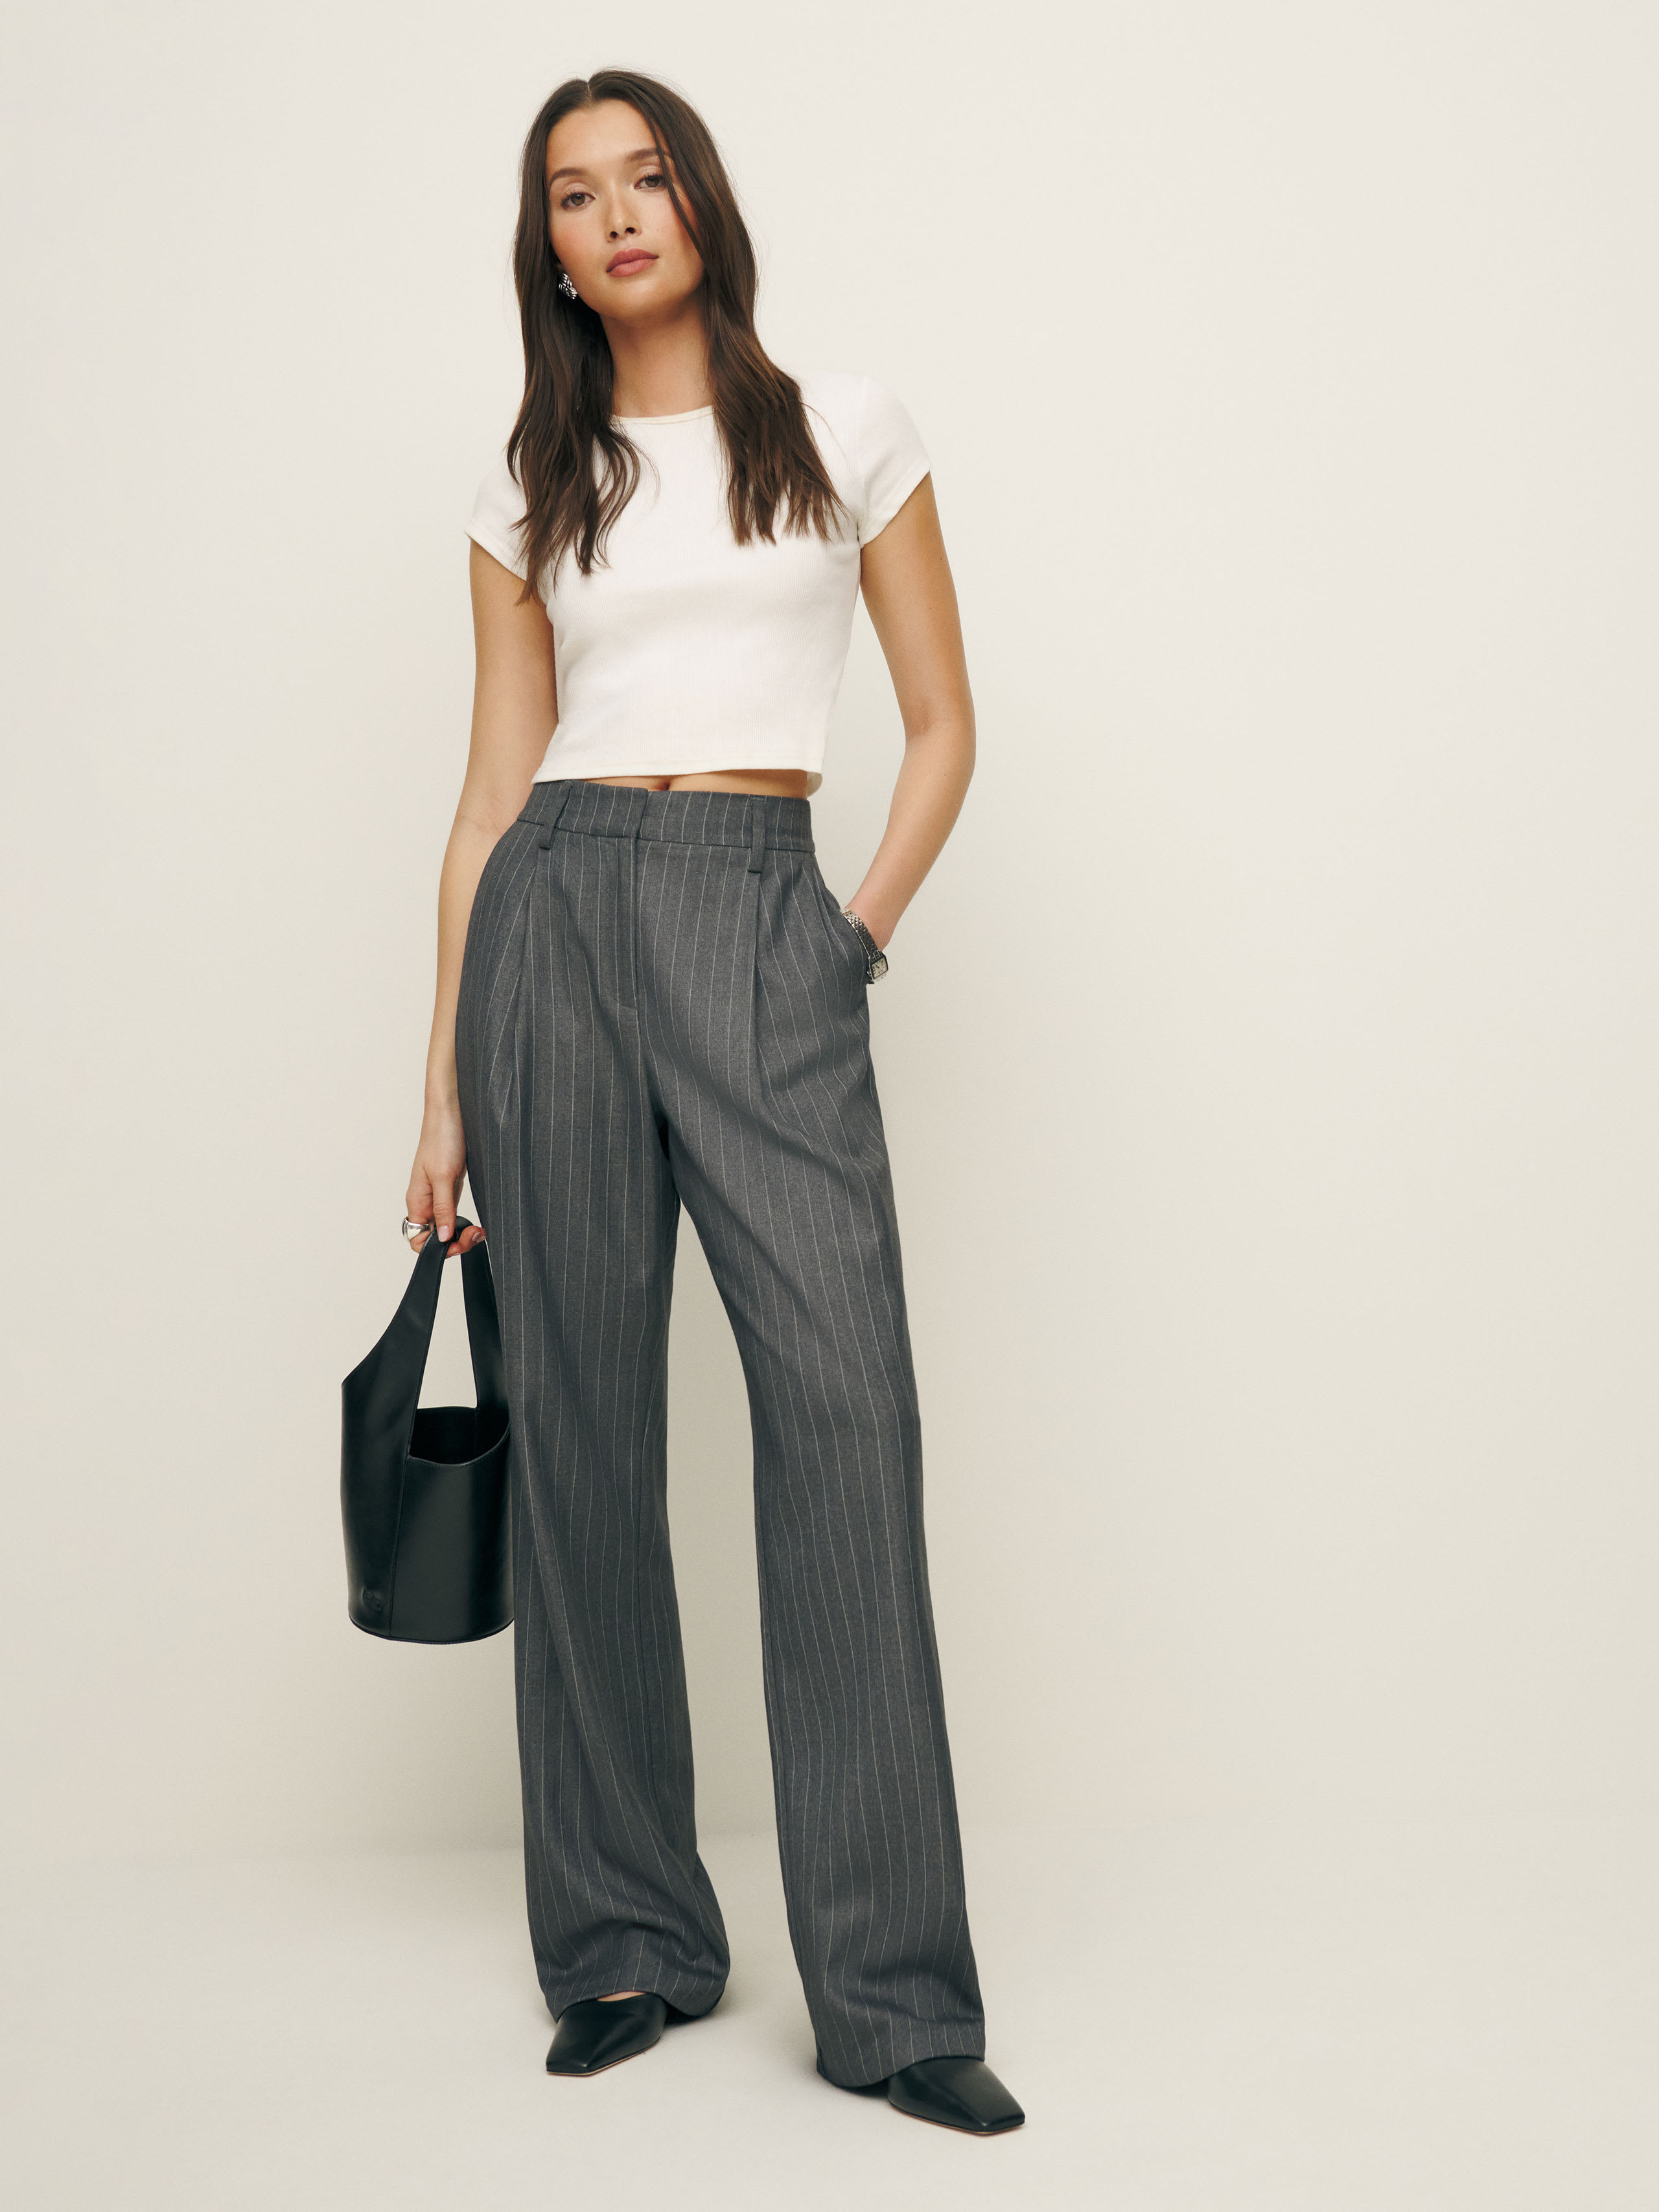 Reformation Alex Pant In Charcoal Stripe